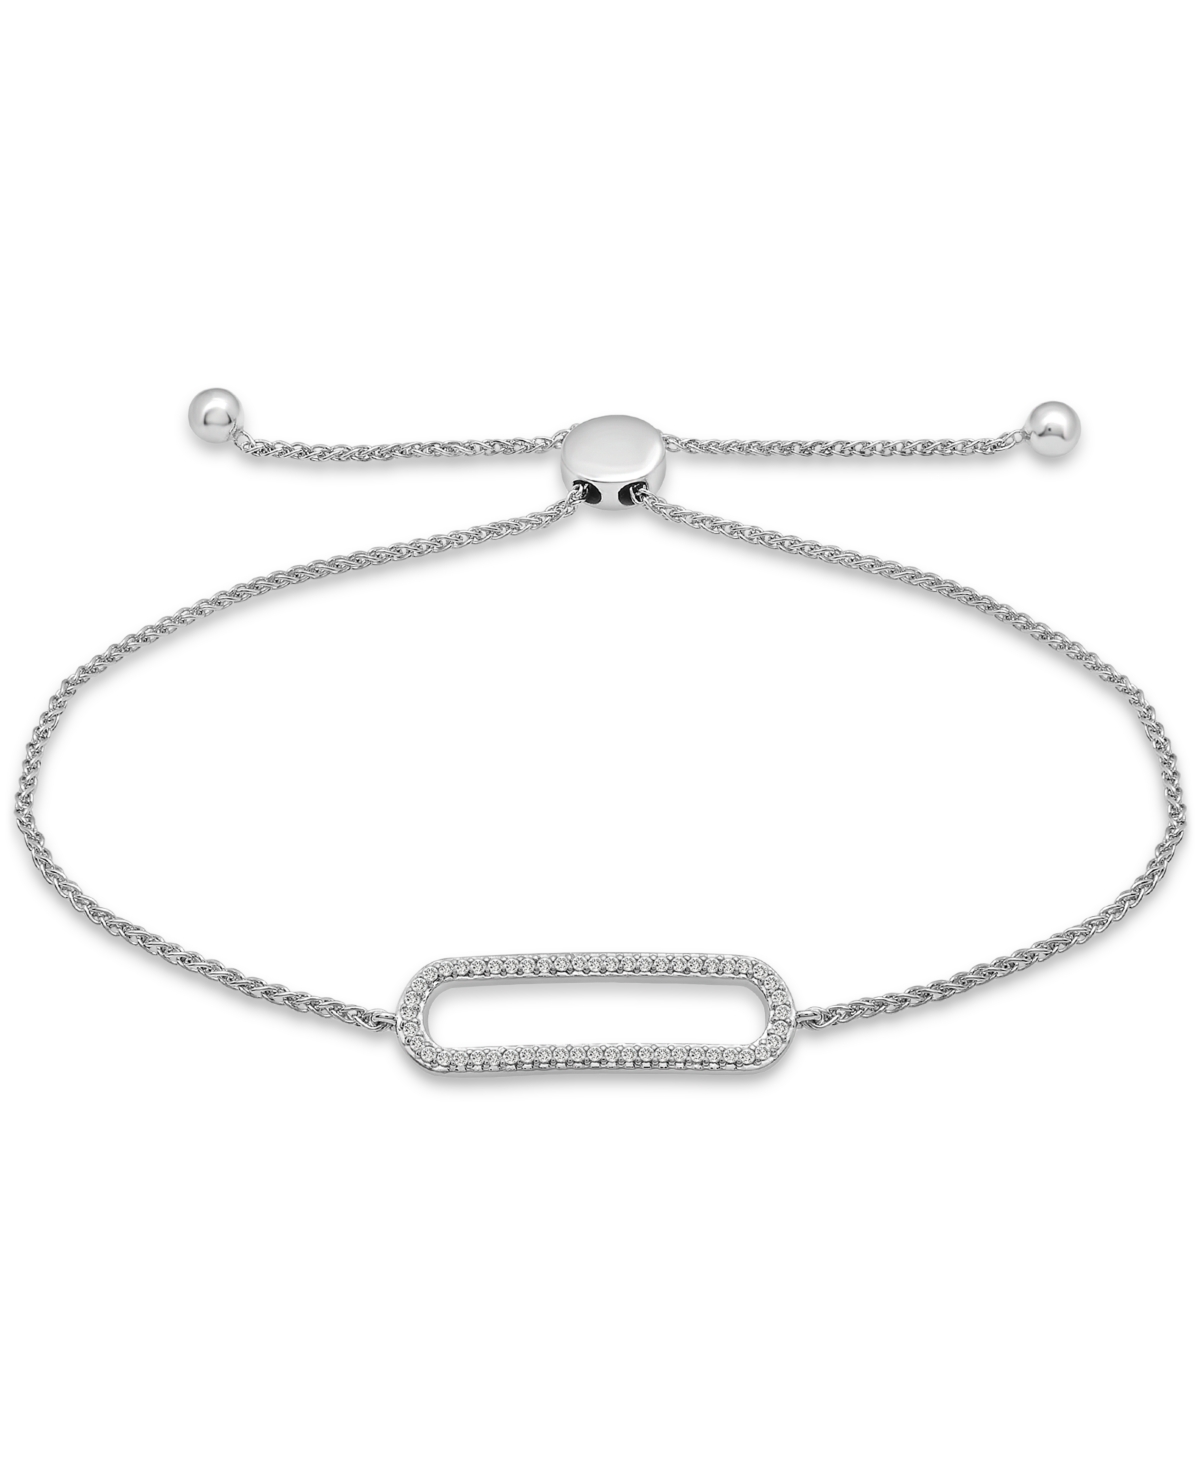 Wrapped Diamond Pave Large Link Bolo Bracelet (1/6 Ct. T.w.) In 10k White Gold, Created For Macy's